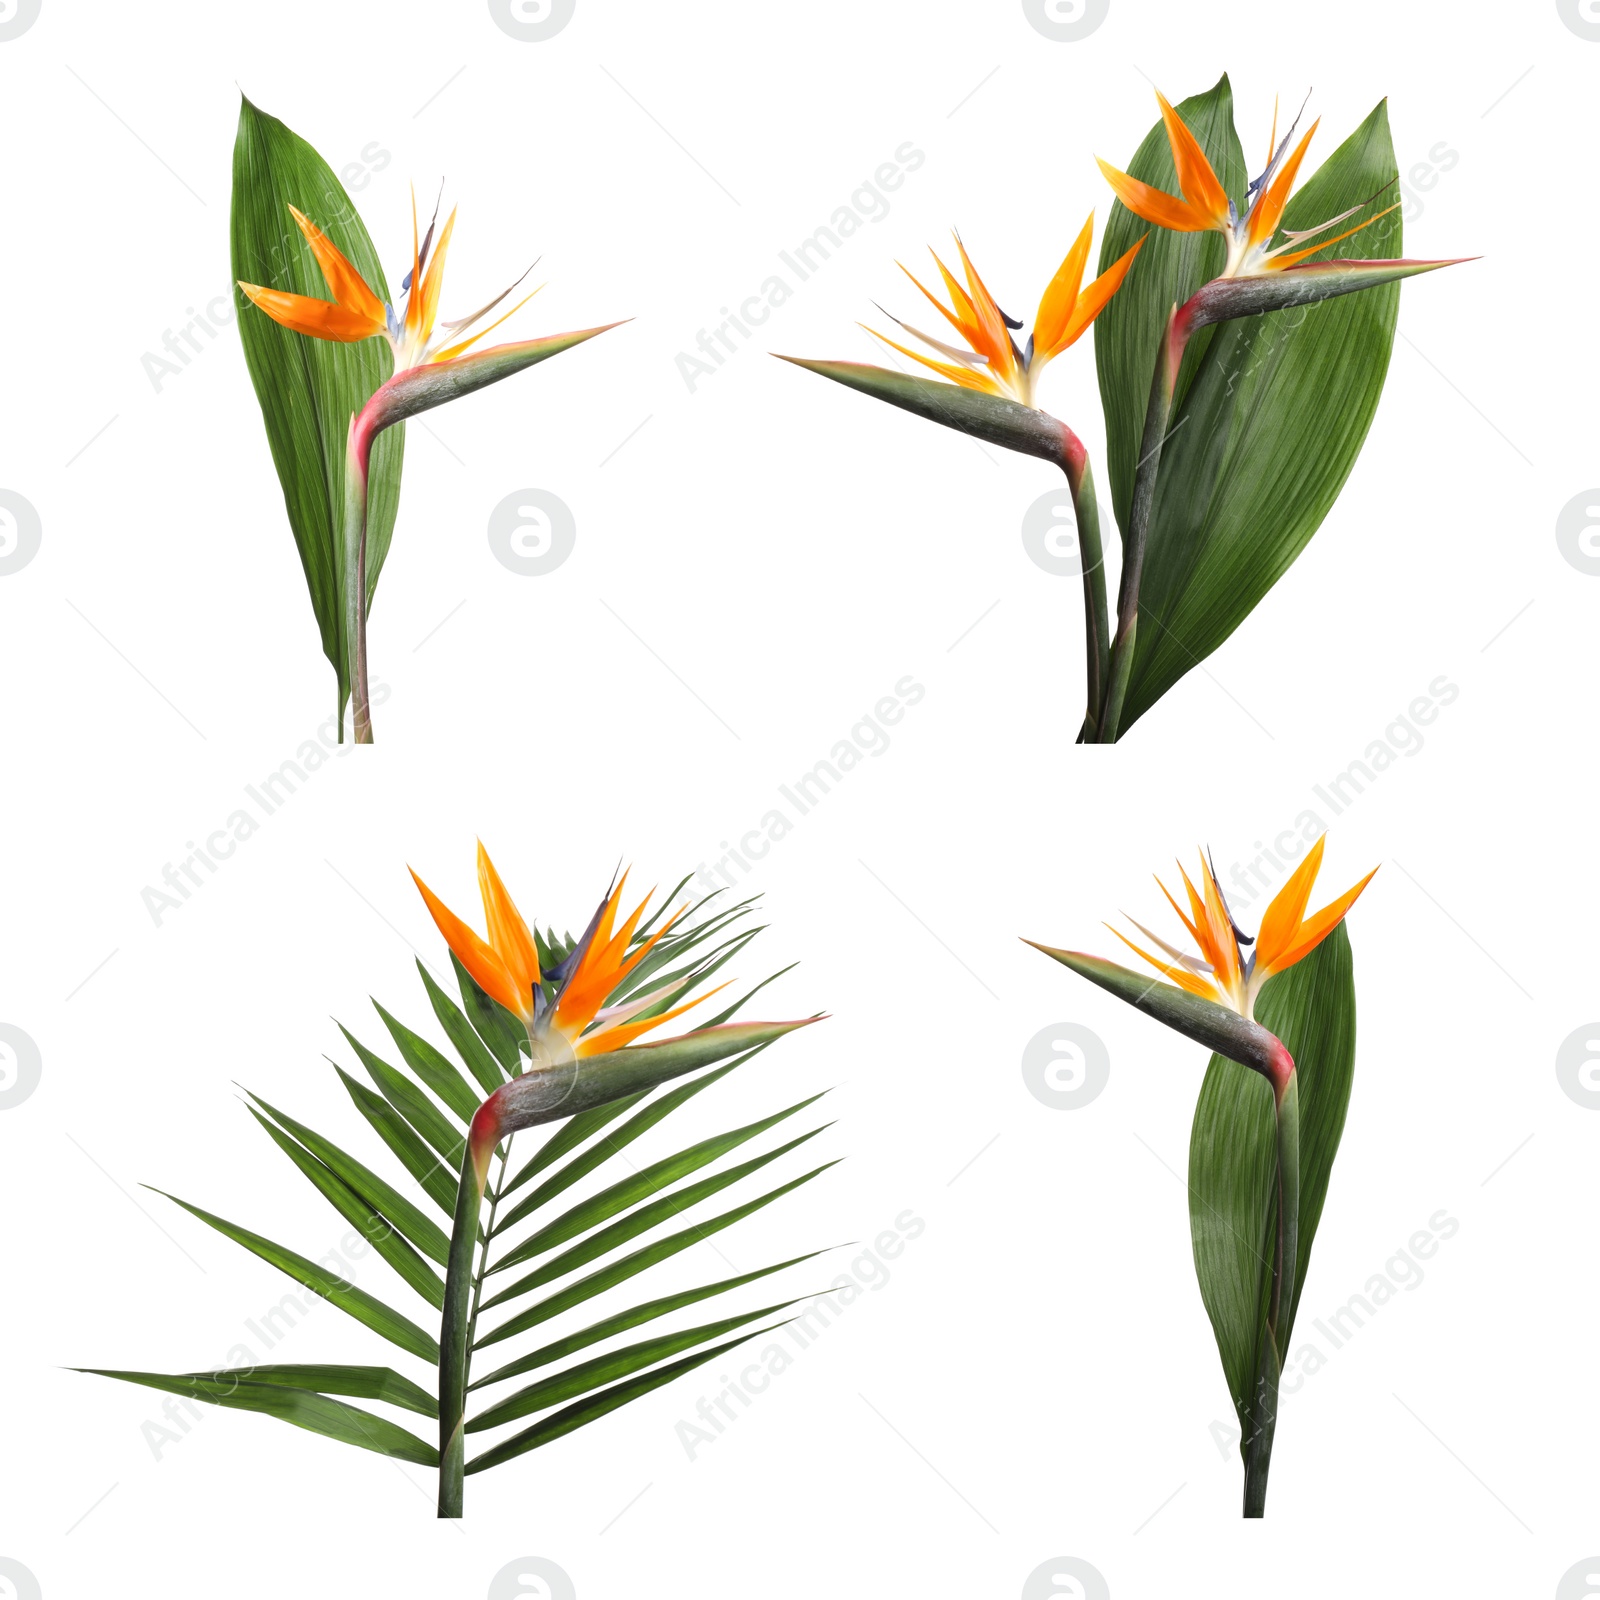 Image of Set with bird of Paradise tropical flowers on white background